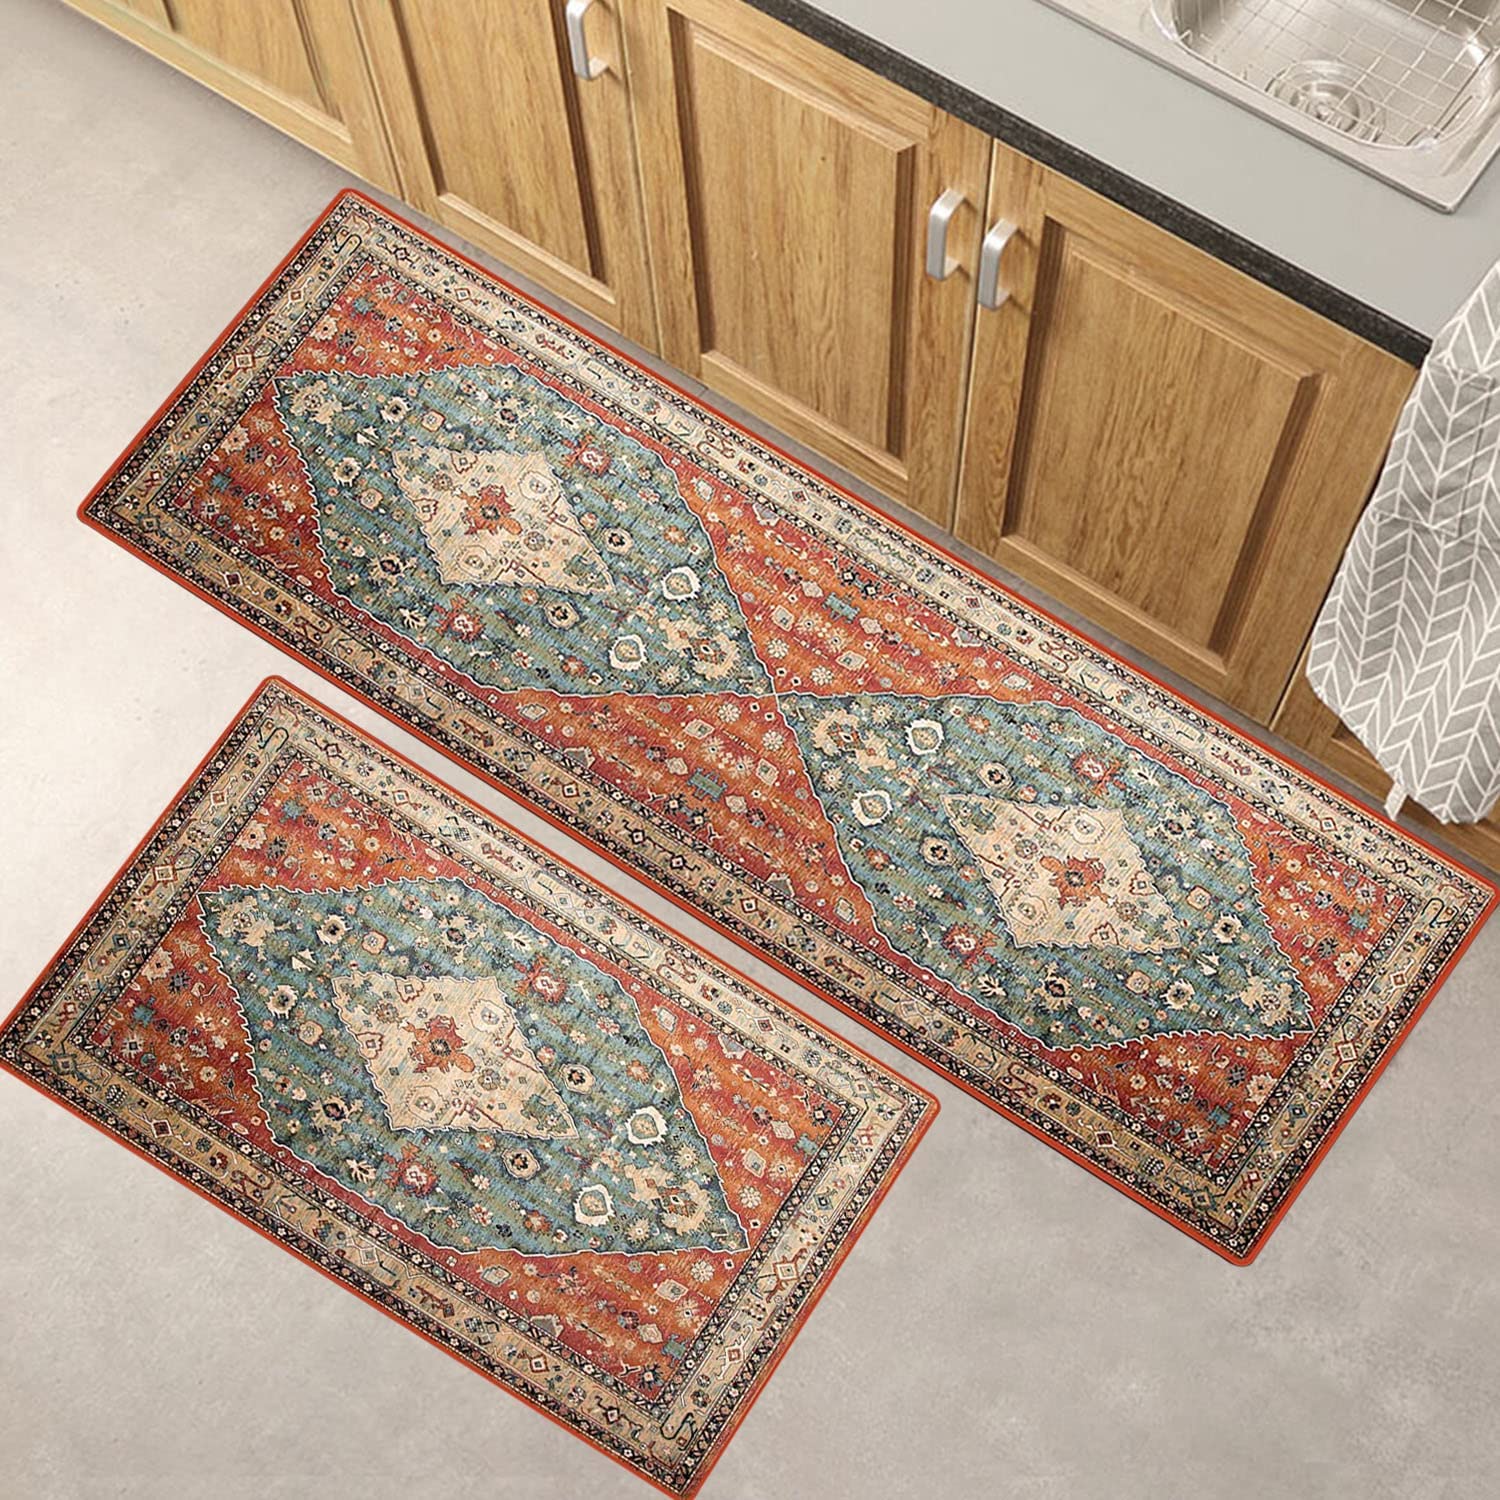 Kitchen Mat 2PCS, Rubber Non-Skid Kitchen Rugs Washable, Absorbent